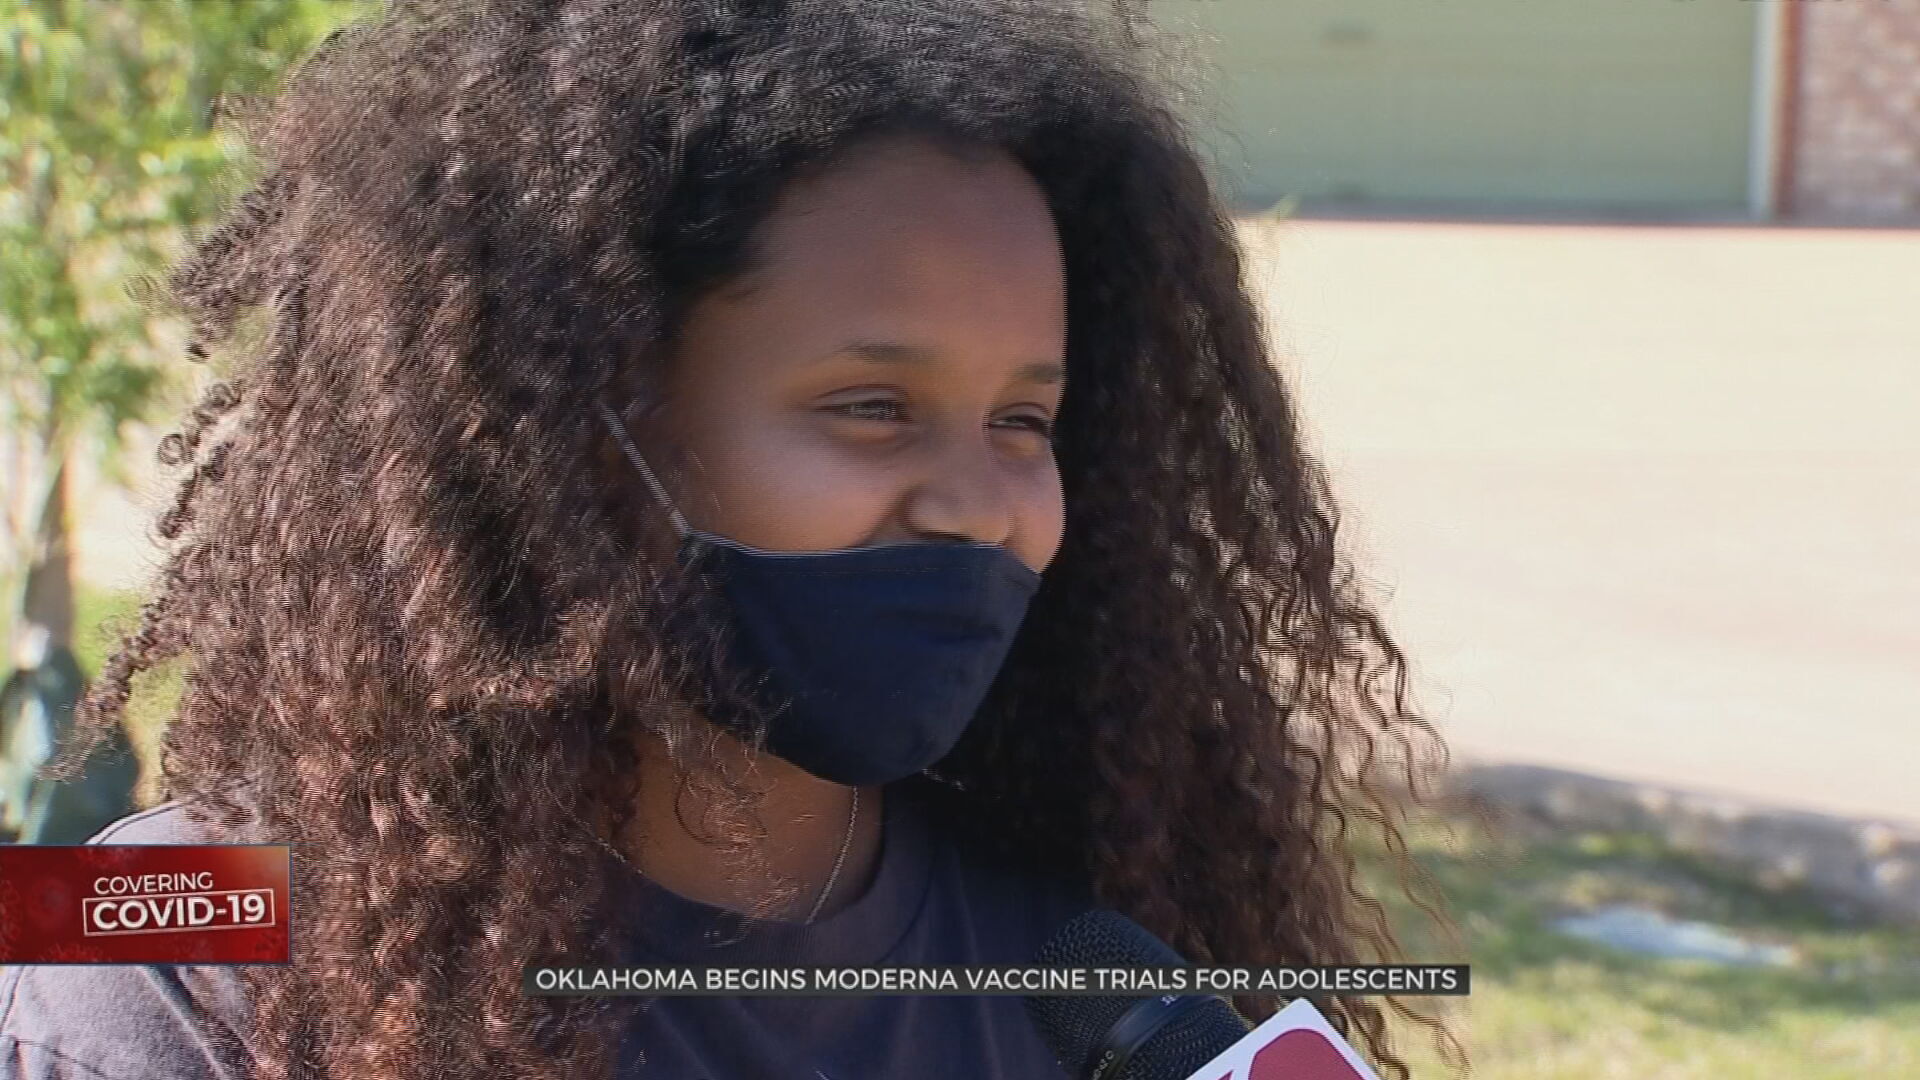 Oklahoma Part Of Ongoing Moderna Adolescent Trial For COVID-19 Vaccine